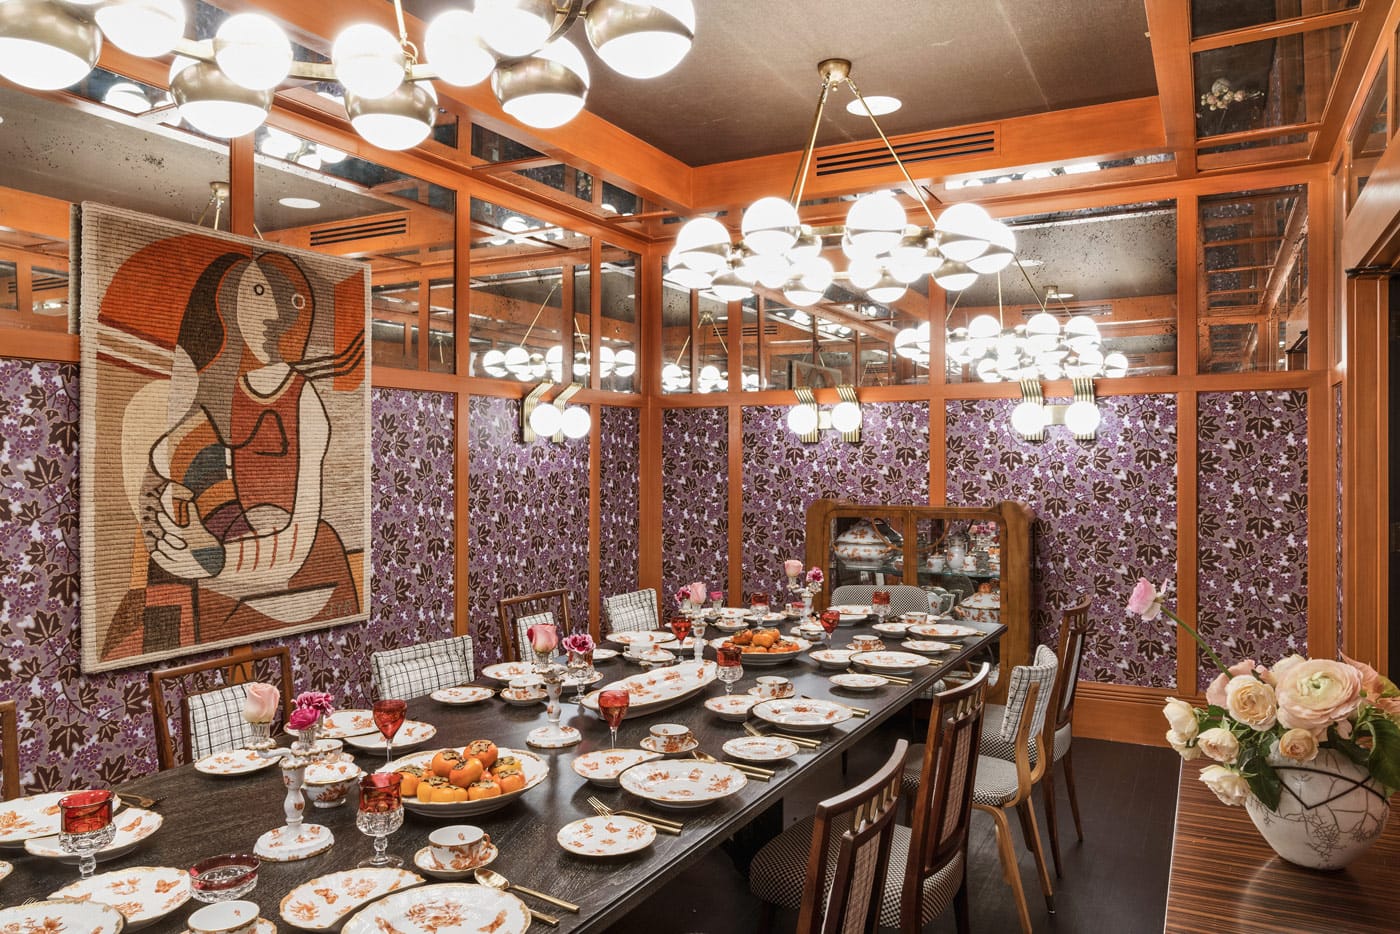 The stylish dining room where Gilda’s Salon Dinners are held. Photo courtesy of Proper Hotel.